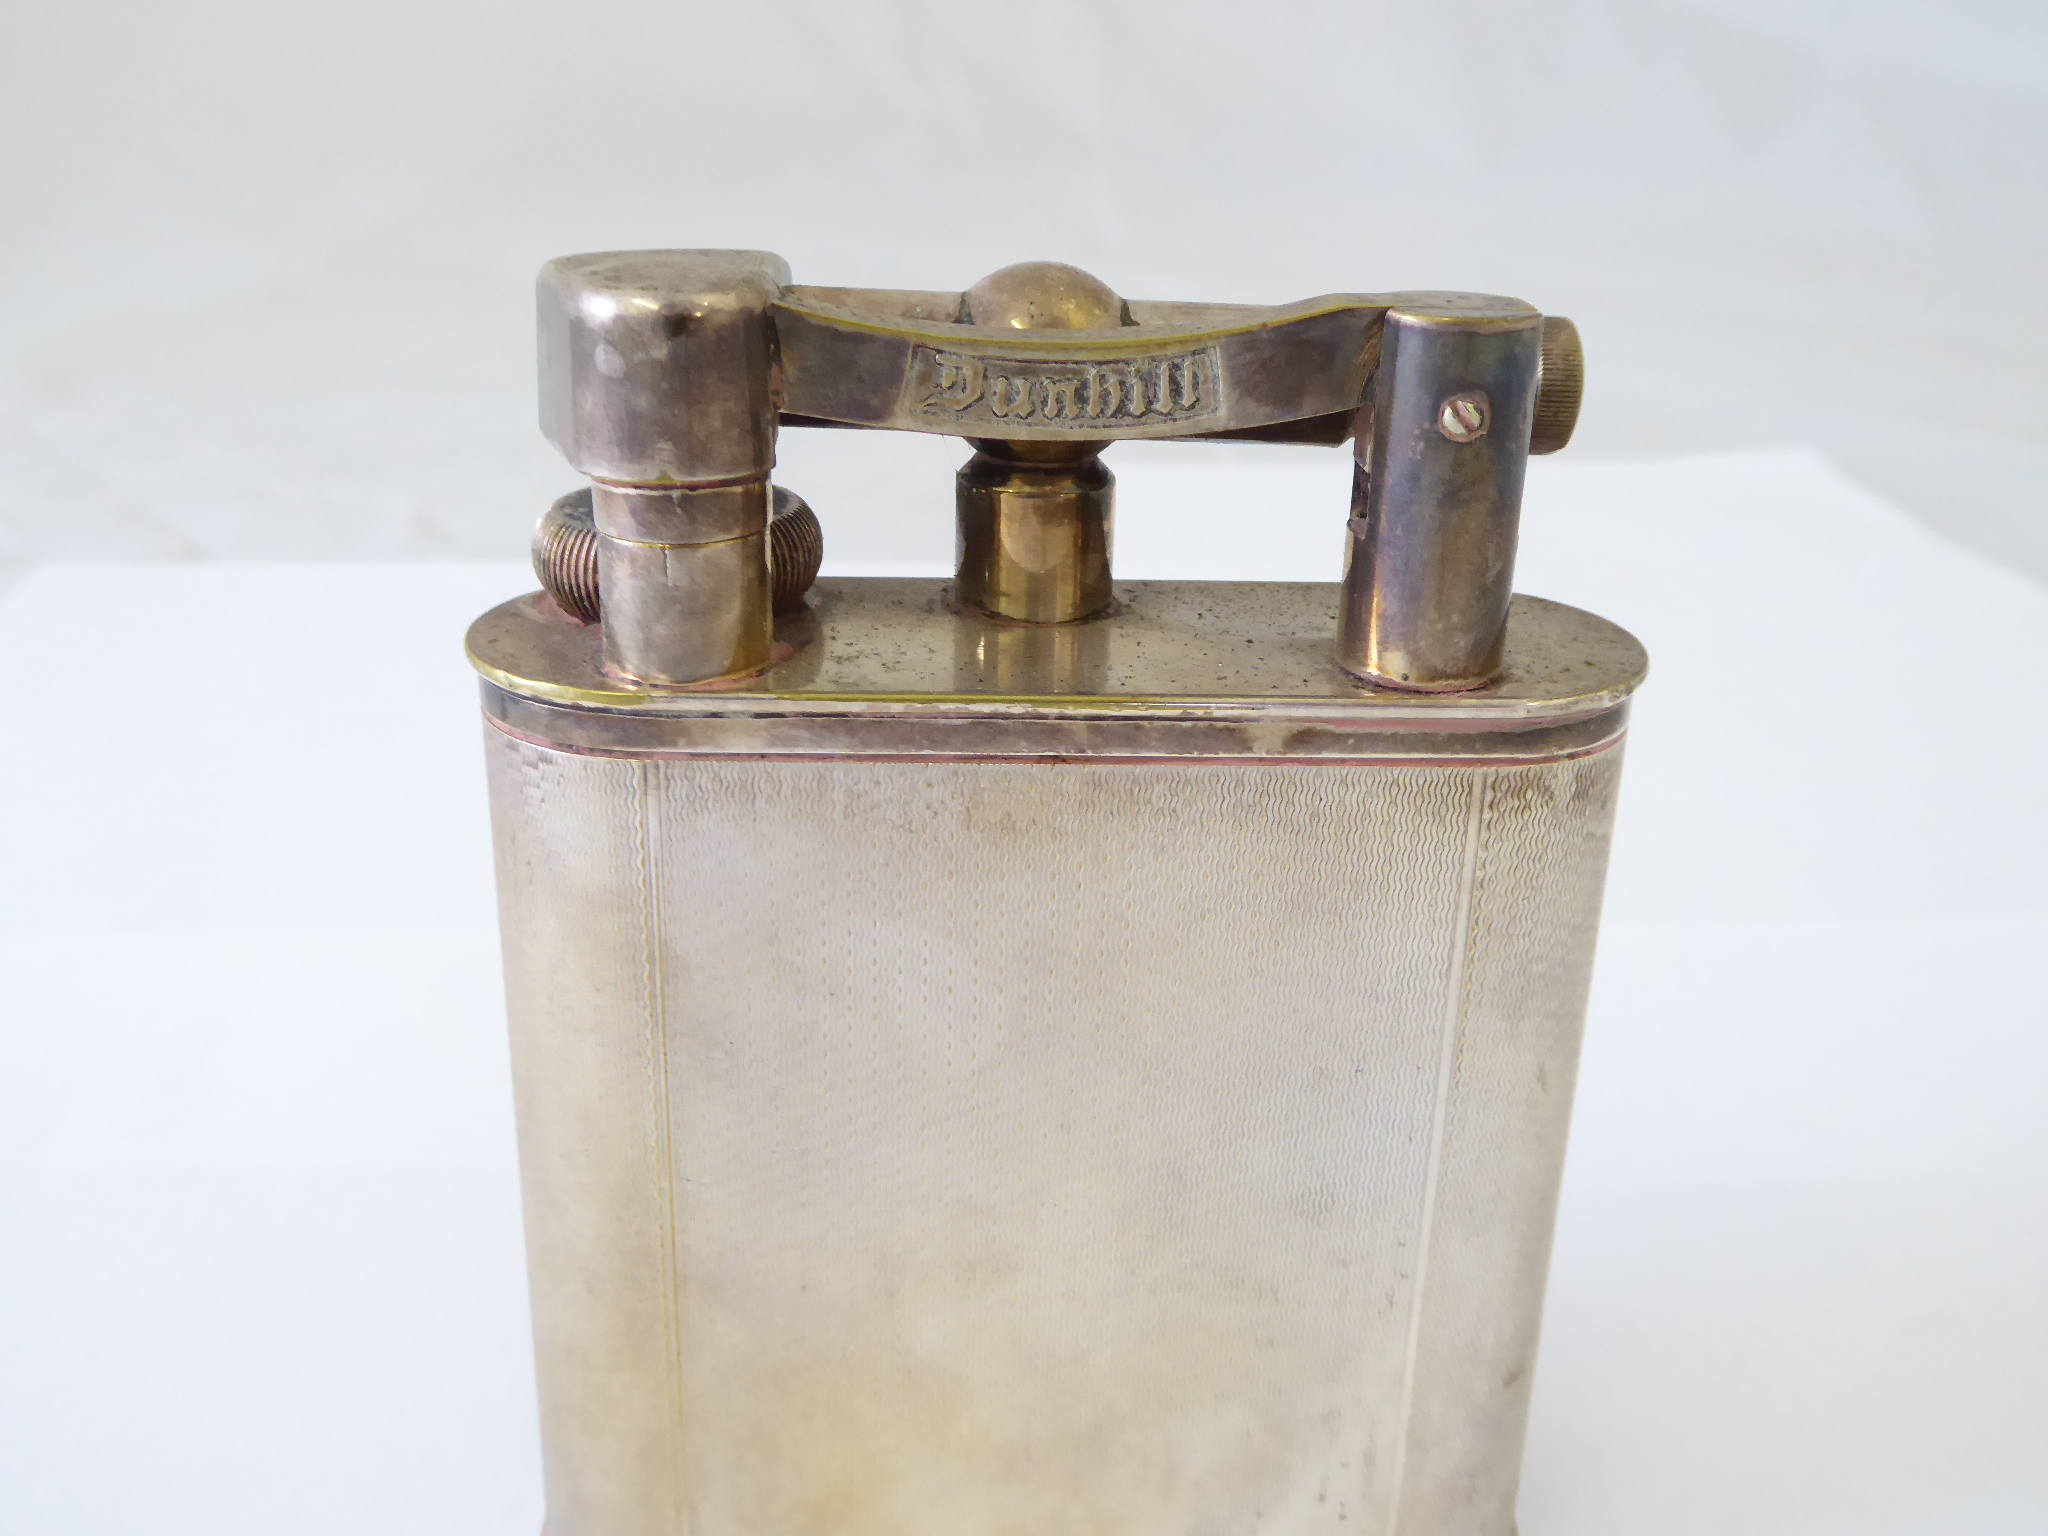 A Dunhill silver plated table lighter stamped Dunhill Reg'd Design No. 737418, Patent No. 390107, - Image 2 of 3